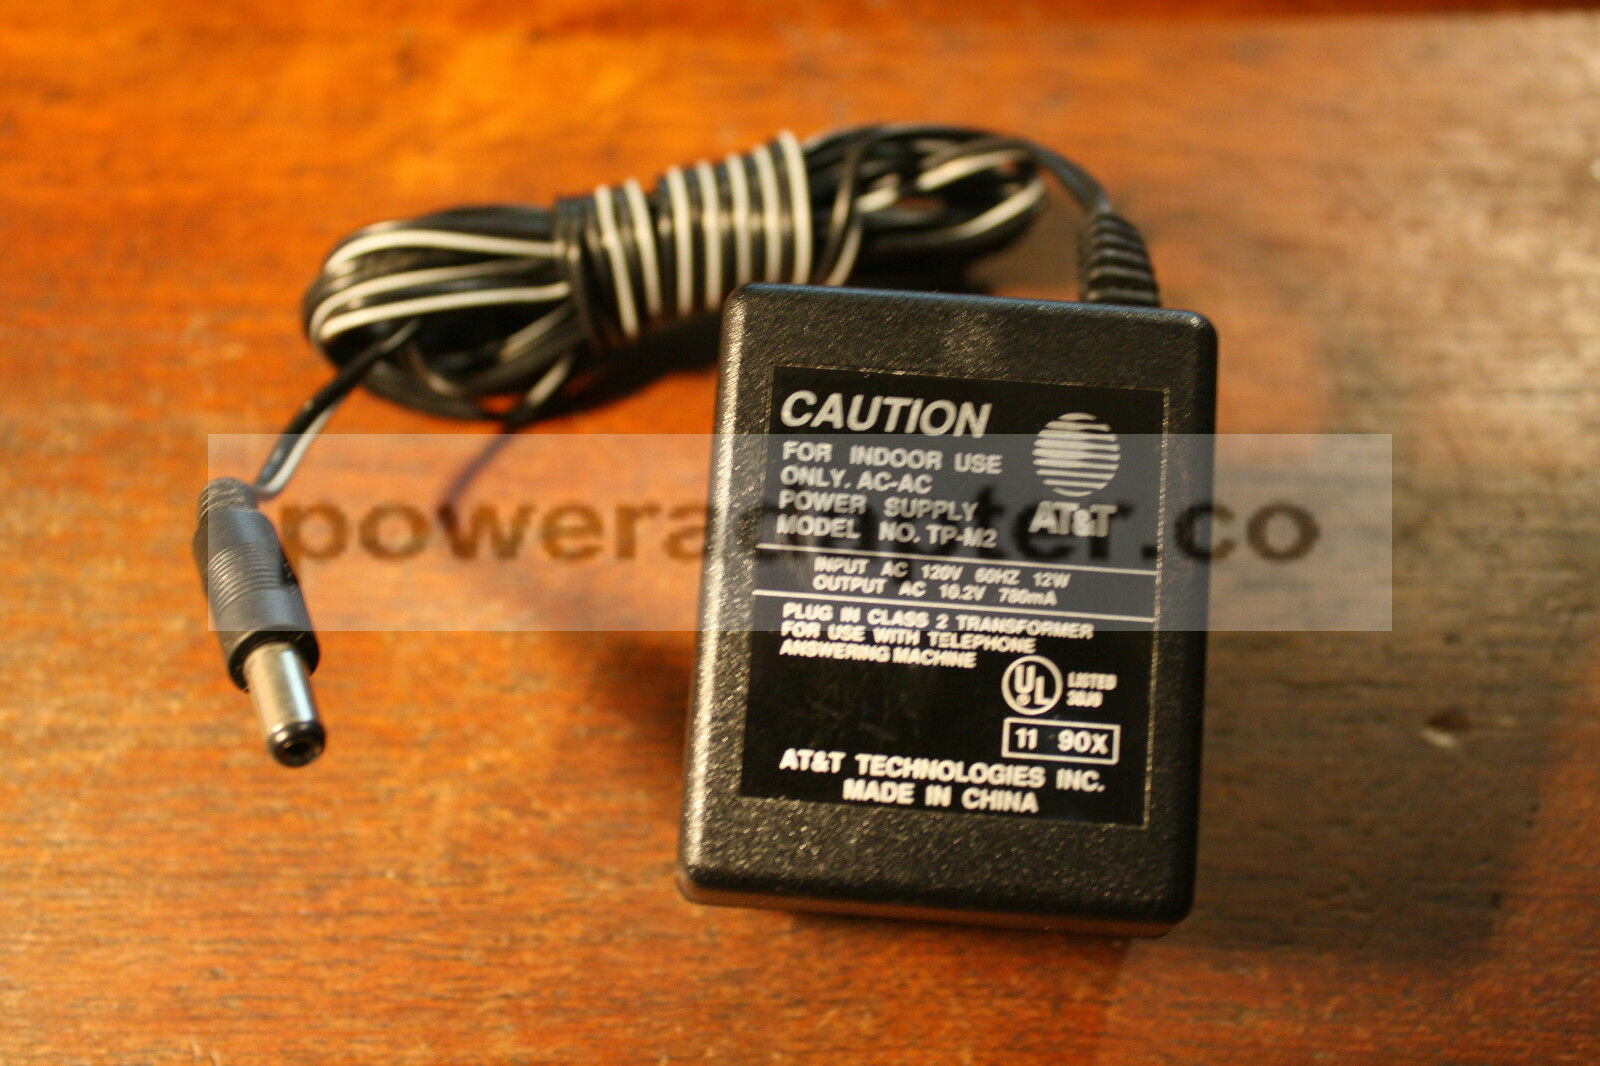 AT&T AC/AC Adapter Power Supply TP-M2 10.2V 780mA Condition: Used: An item that has been used previously. The item m